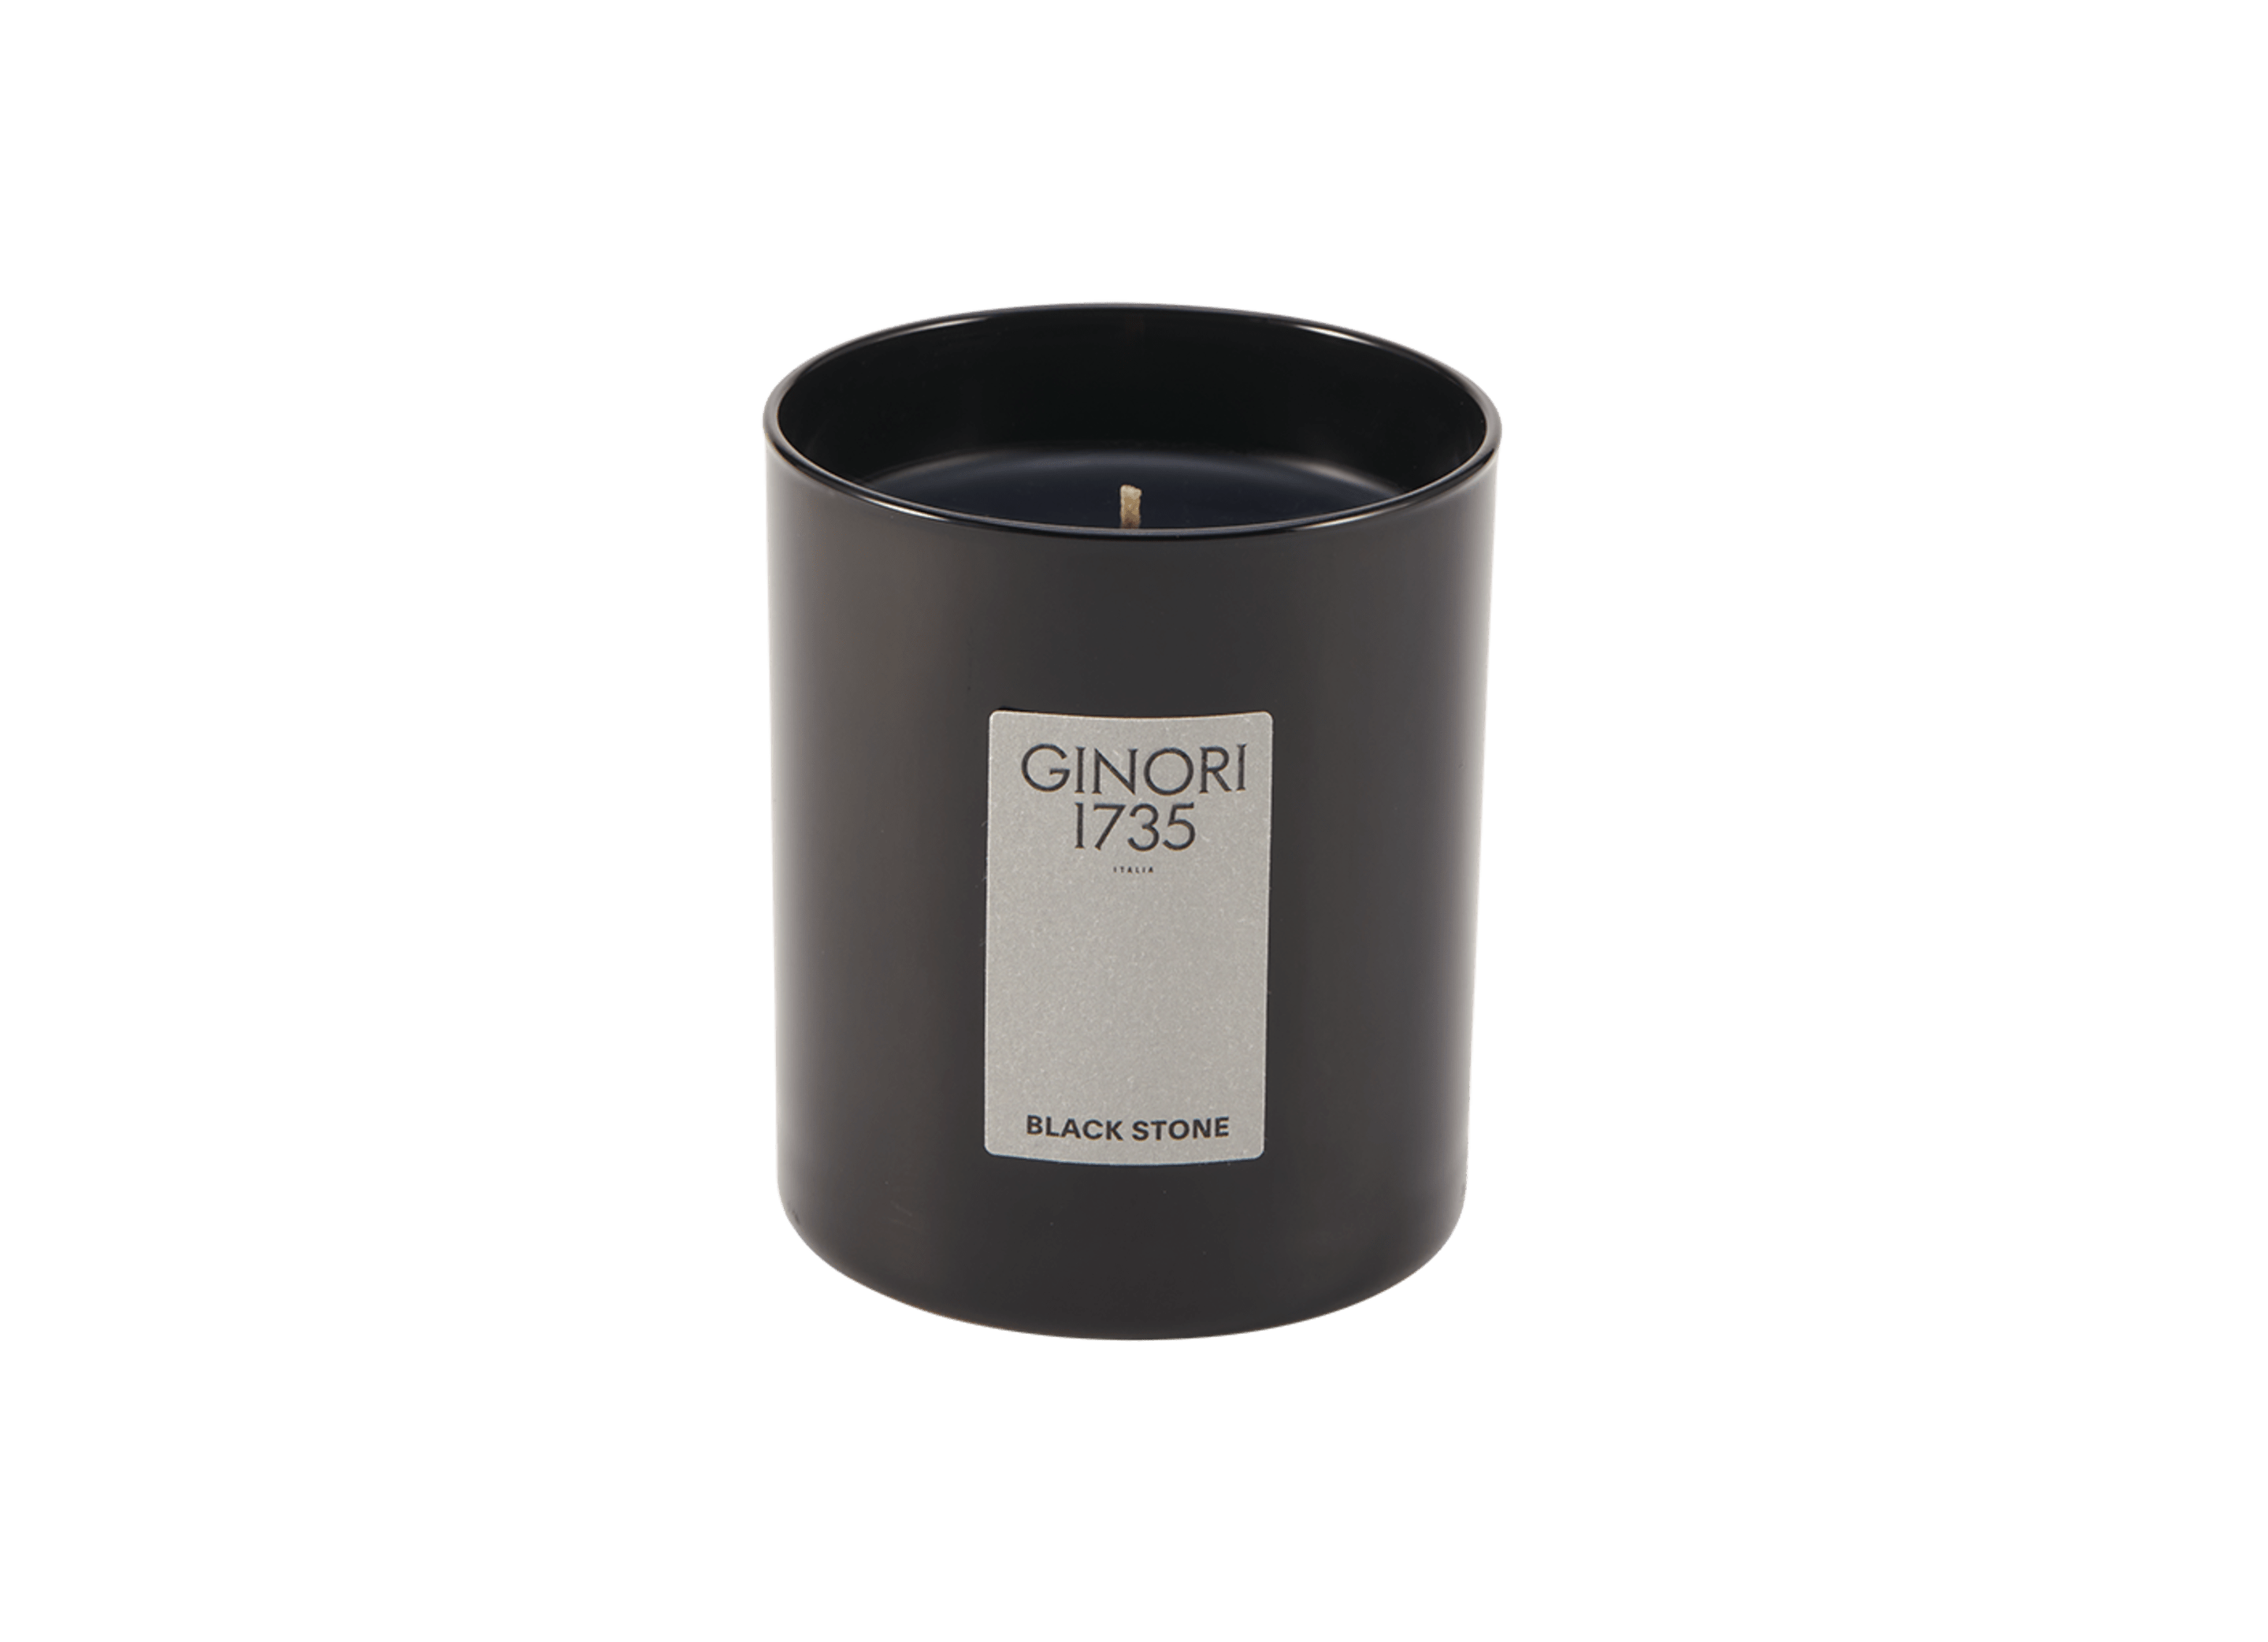 GINORI 1735 Cuoio Rosso Scented Candle Refill for Candleholder Vase, 39 oz.